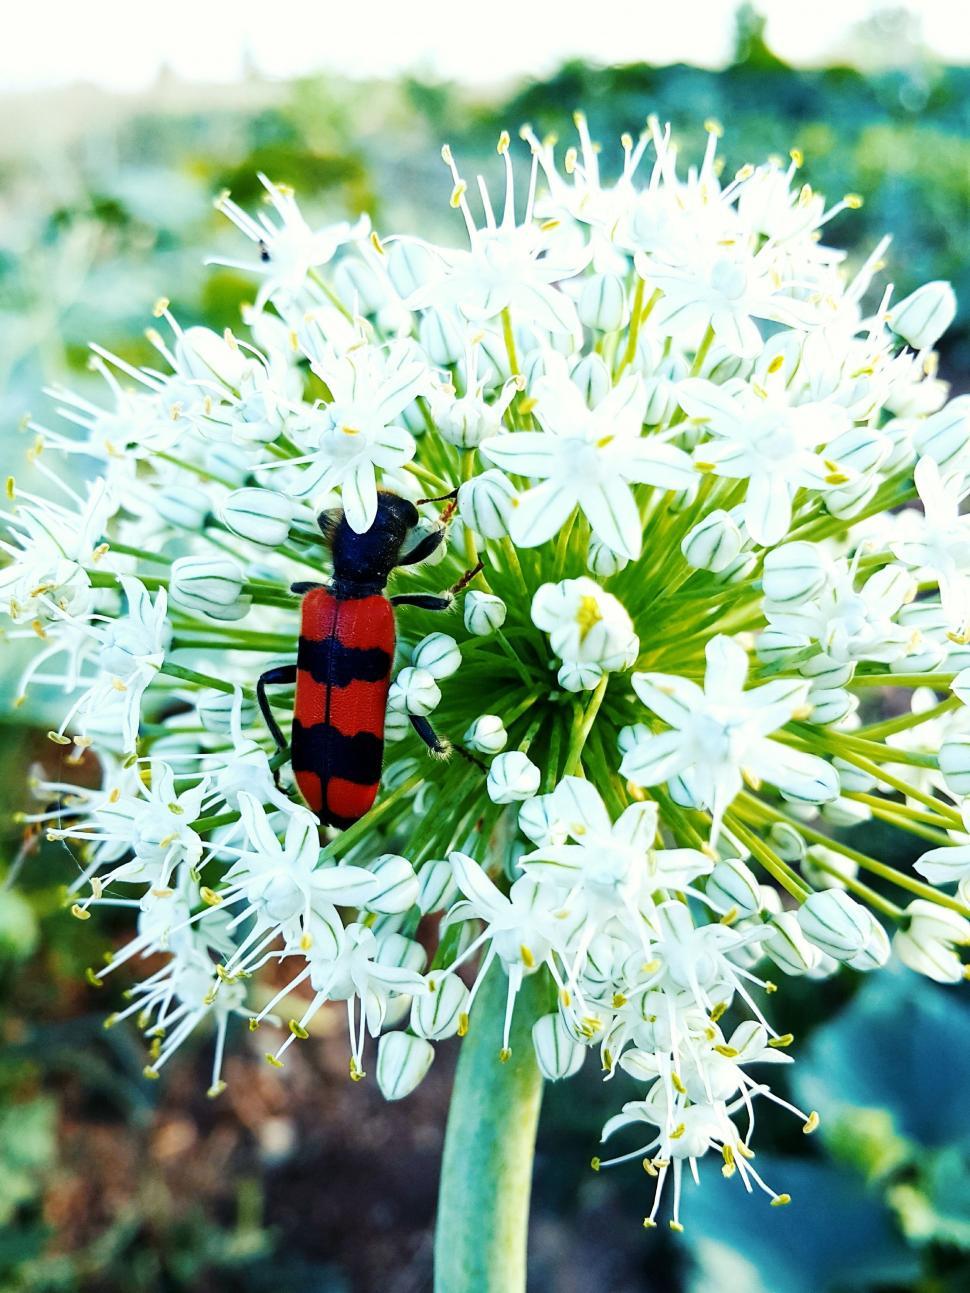 Free Image of Red And Black Beetle 